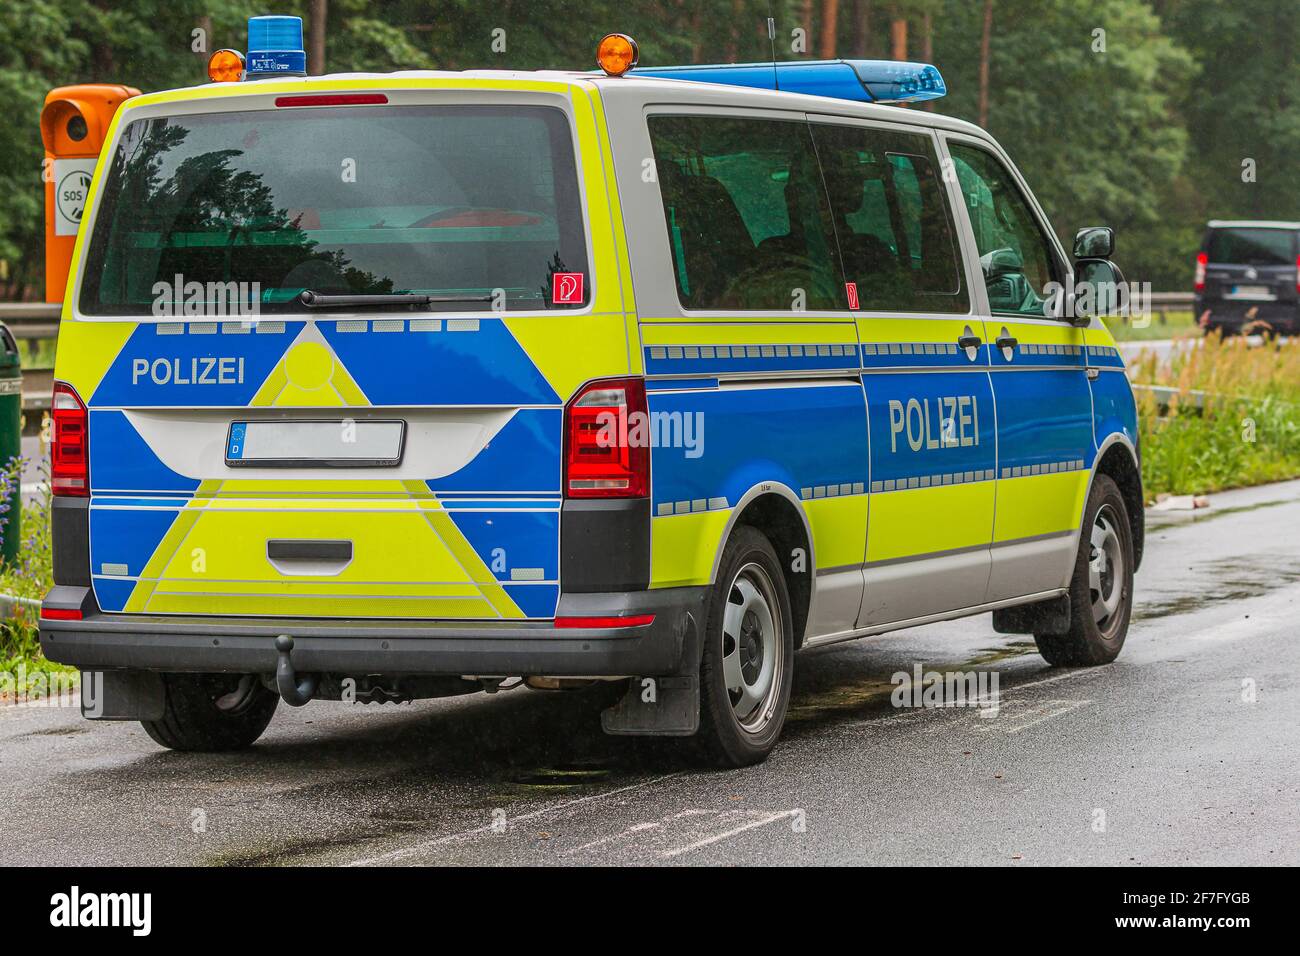 German police car in an emergency stop on the highway next to an emergency telephone. Rainy weather and wet road surface. View of the vehicle body Stock Photo